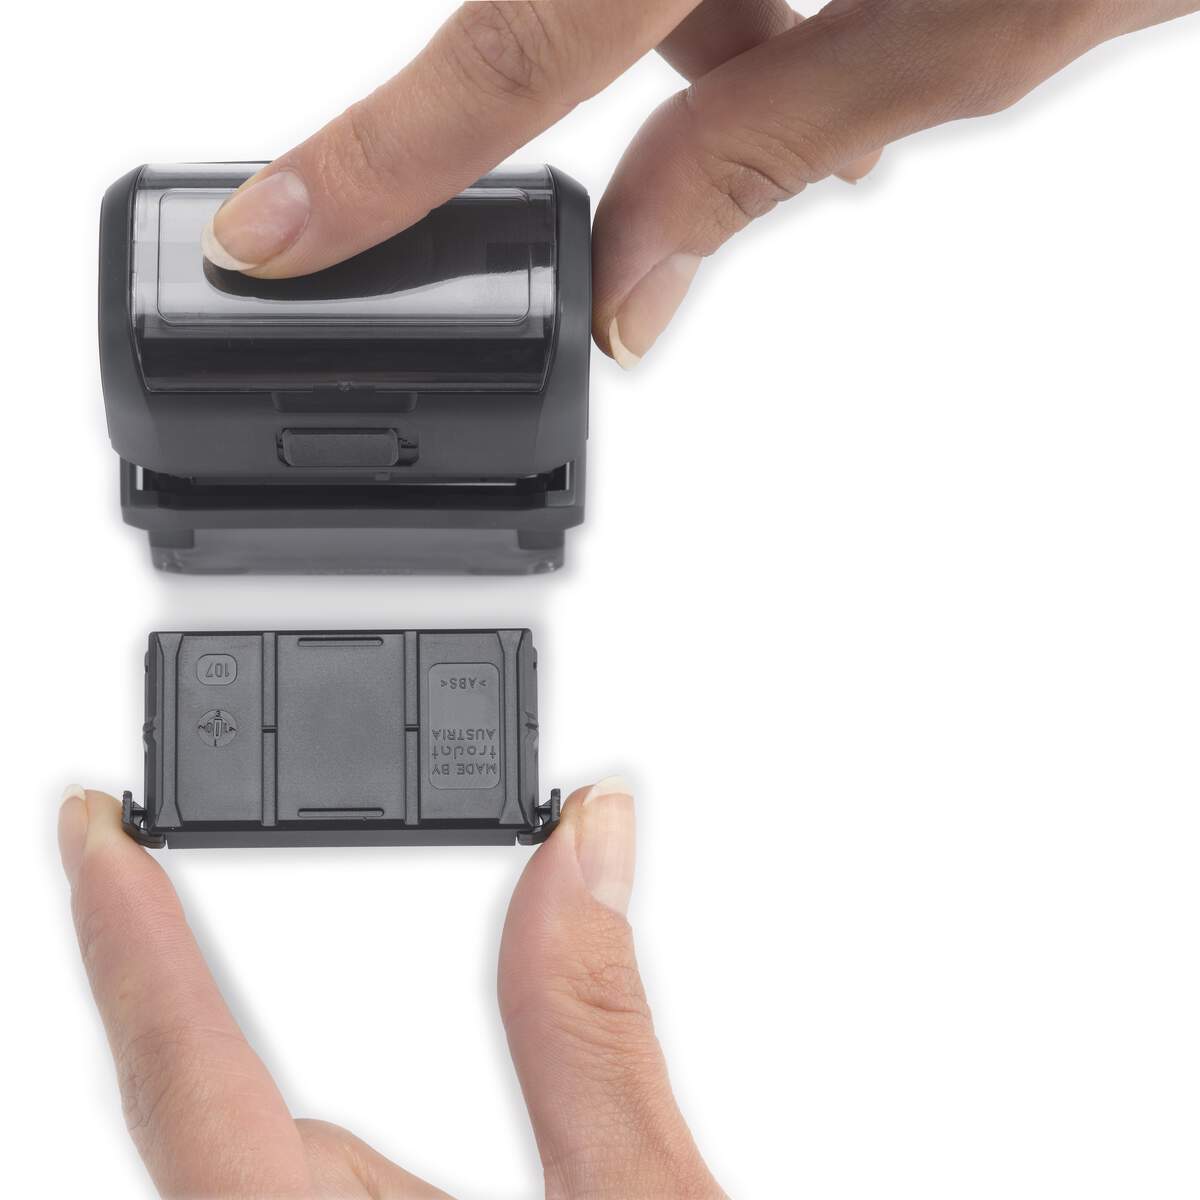 Printy Self-Inking Die Plate Daters Replacement Ink Pads